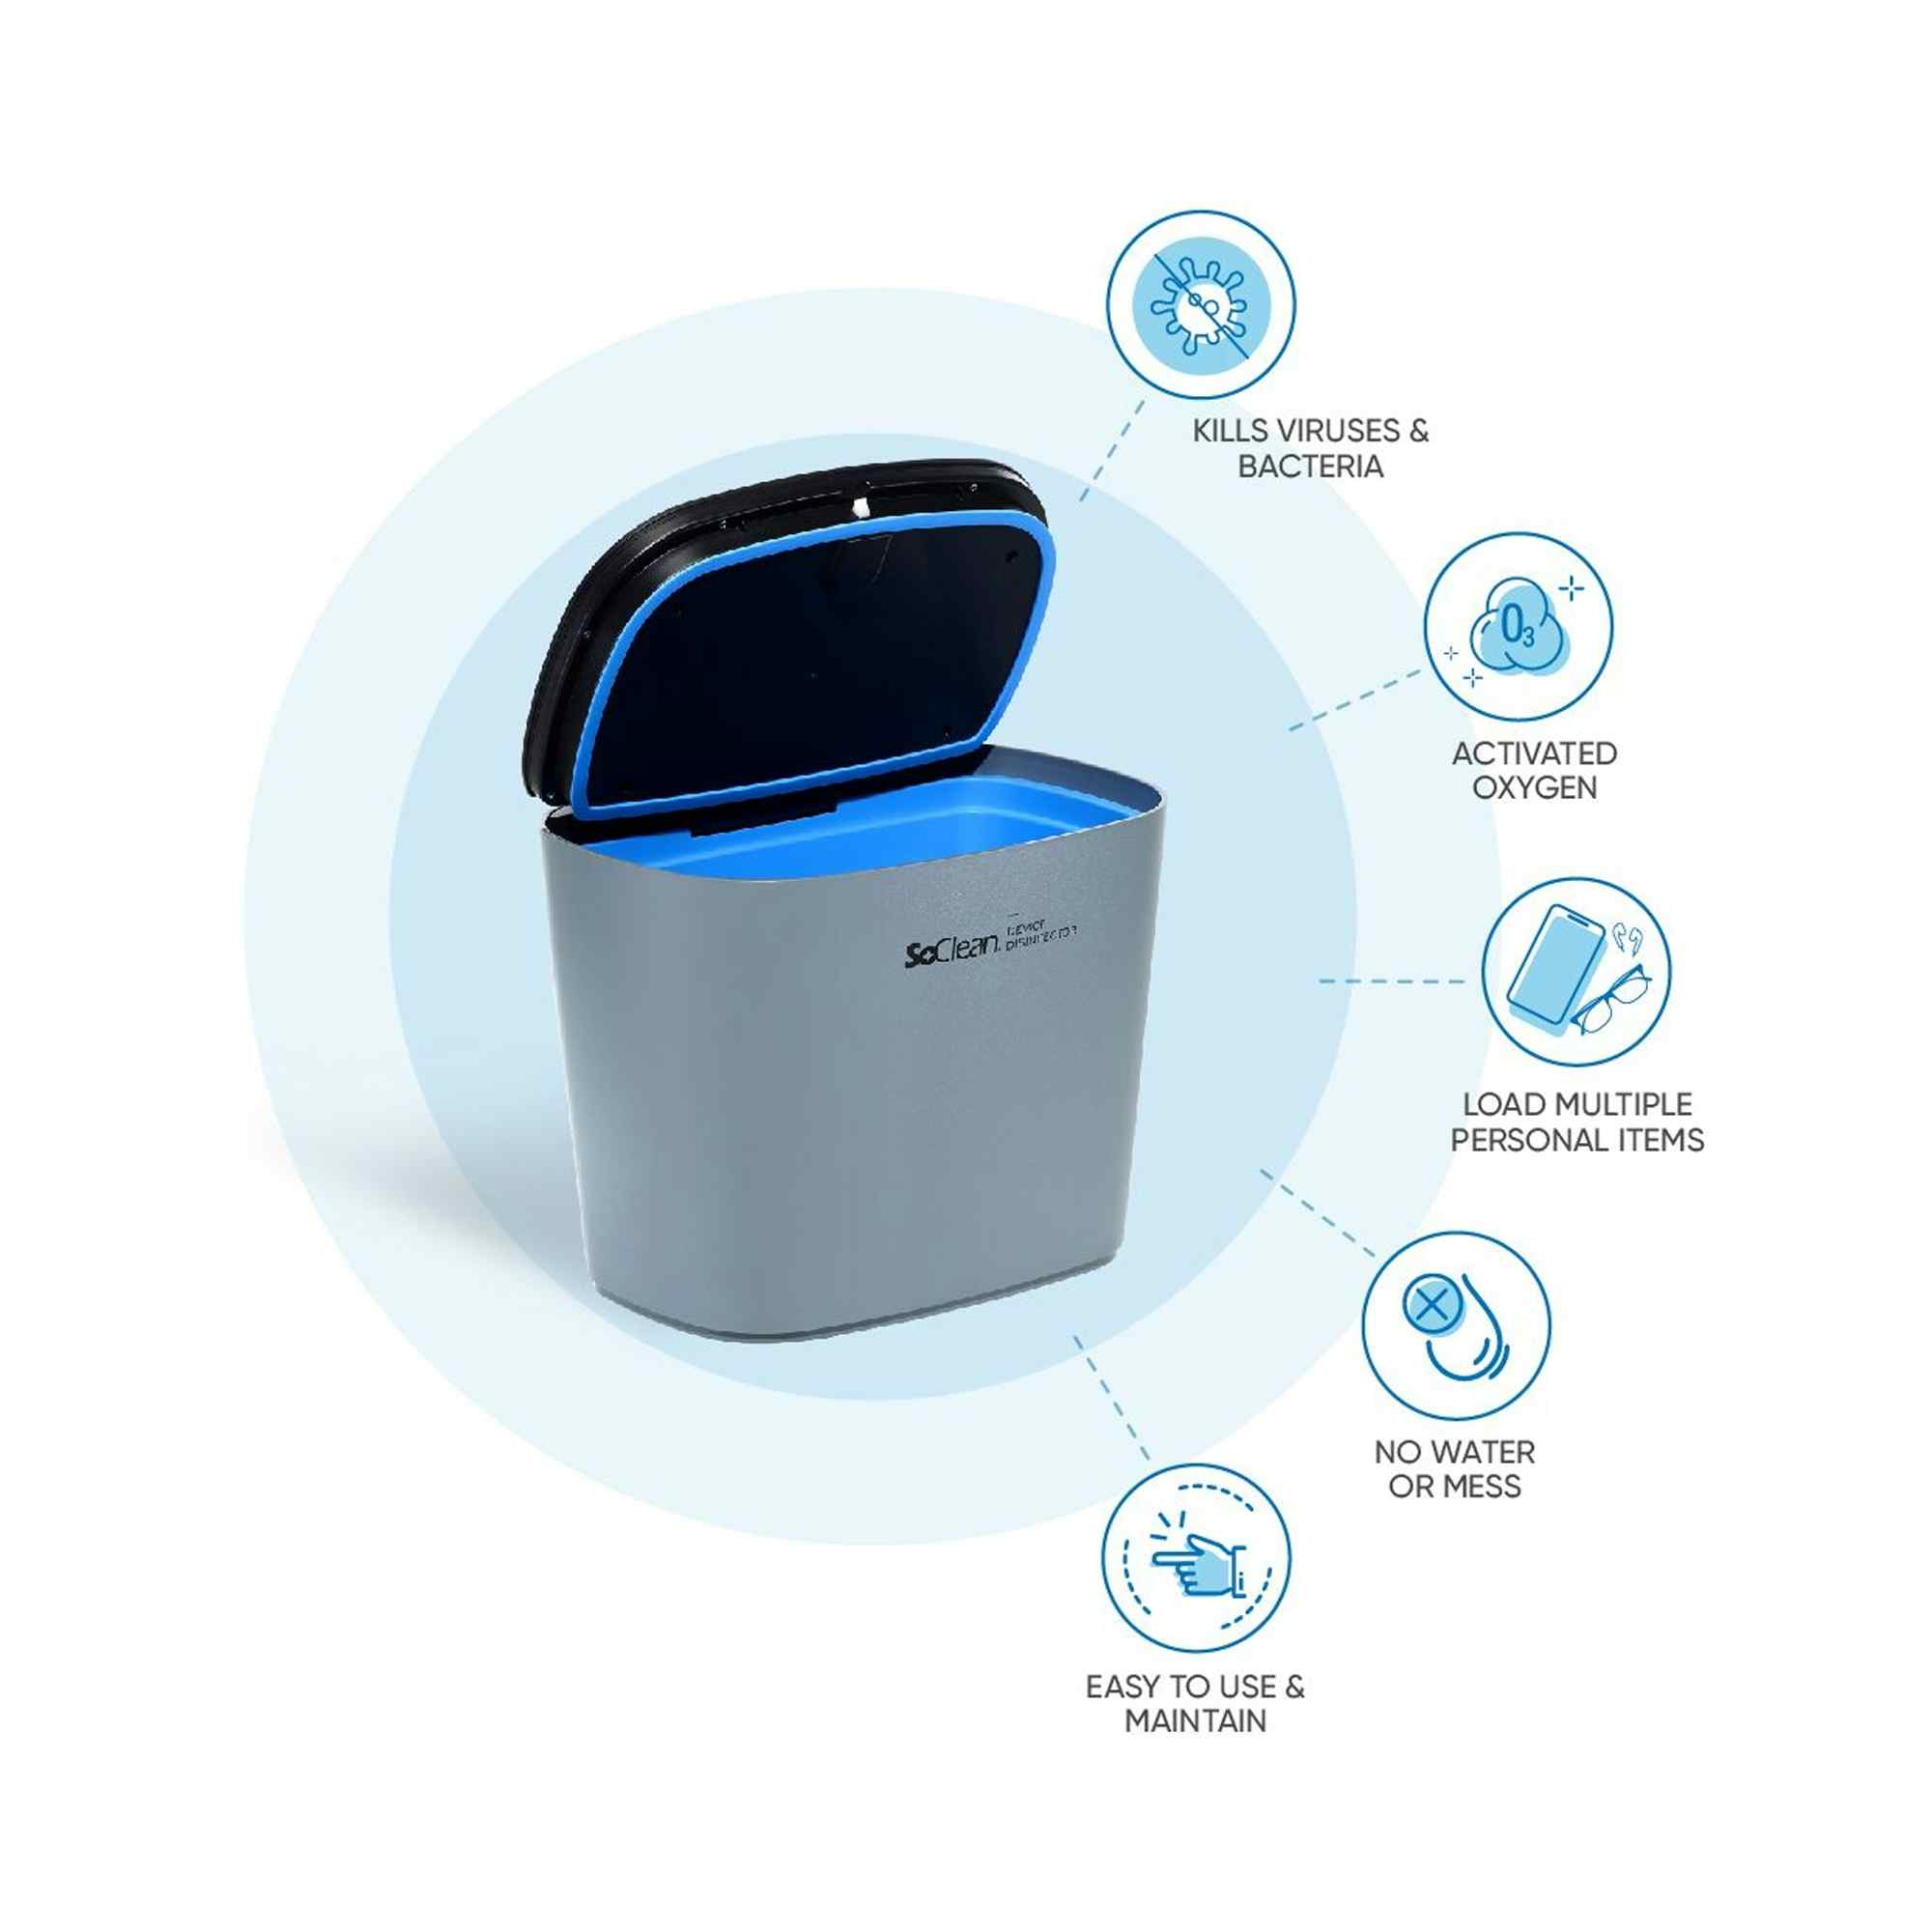 SoClean Device Disinfector, informational